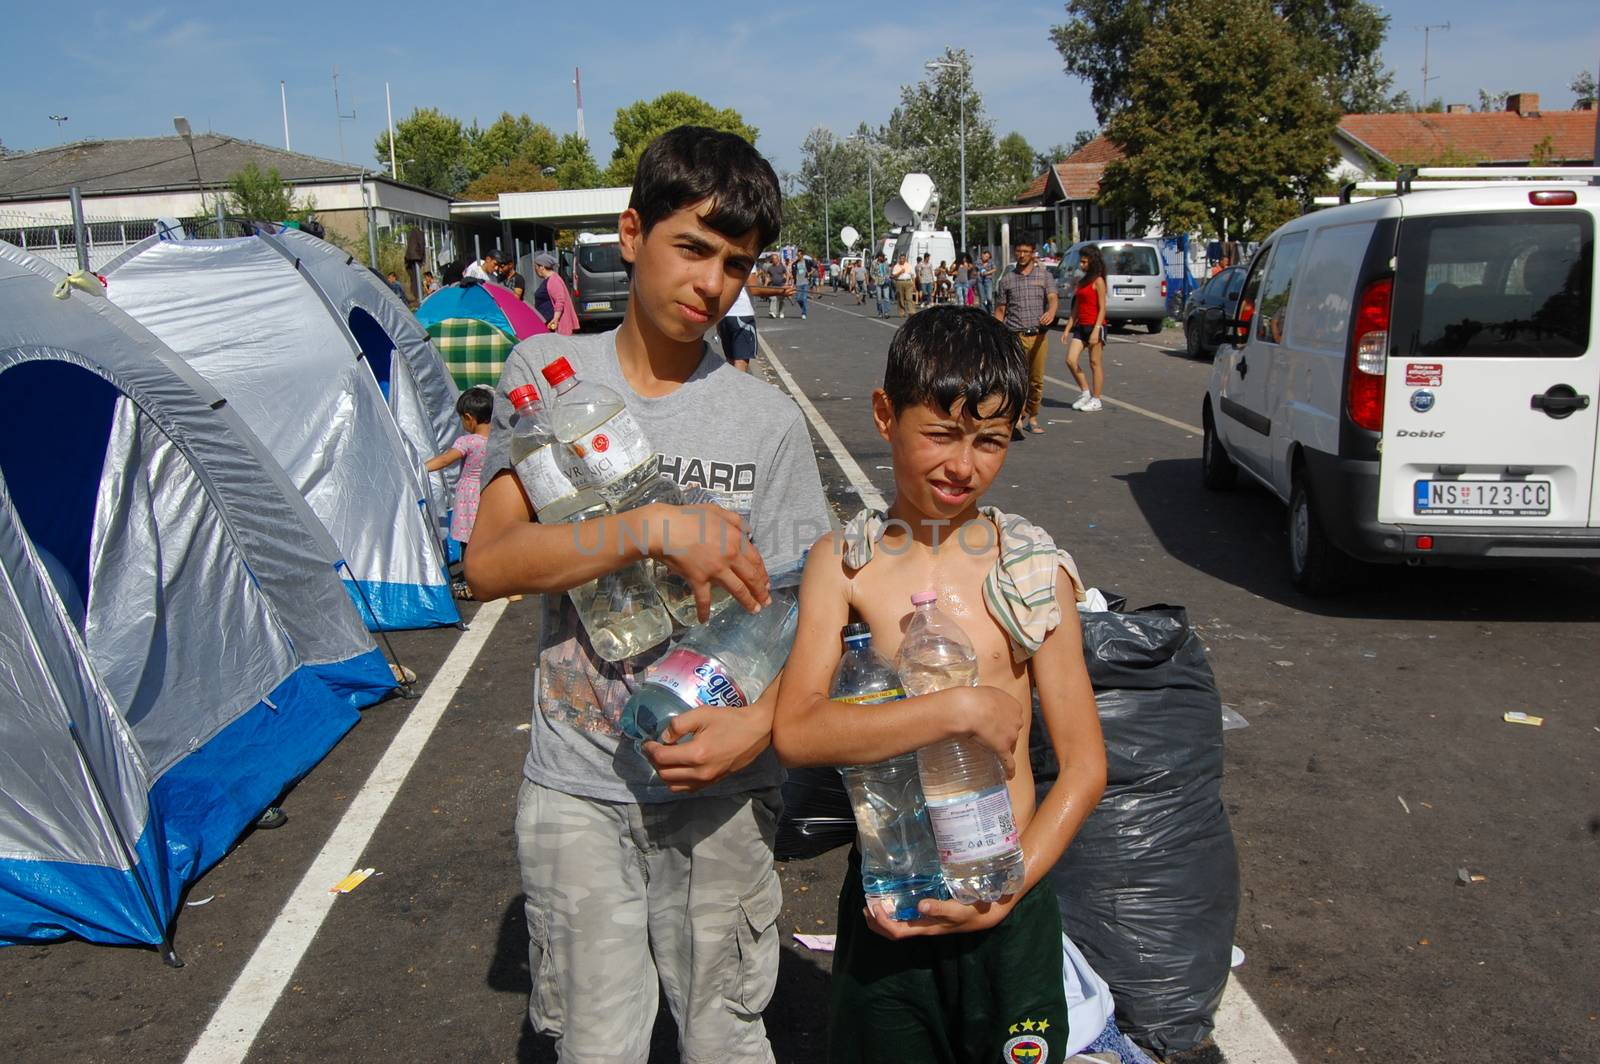 SERBIA, Horgo�: Two young migrant boys hold water near the Serbia-Hungary border in Horgo�, Serbia on September 17, 2015. Recently the migrants have clashed with police forcing the police to use tear gas and water cannons to hold the refugees at bay. The migrants demanded that the razor-wire fence be opened, which would allow them to continue their journey though Europe. 